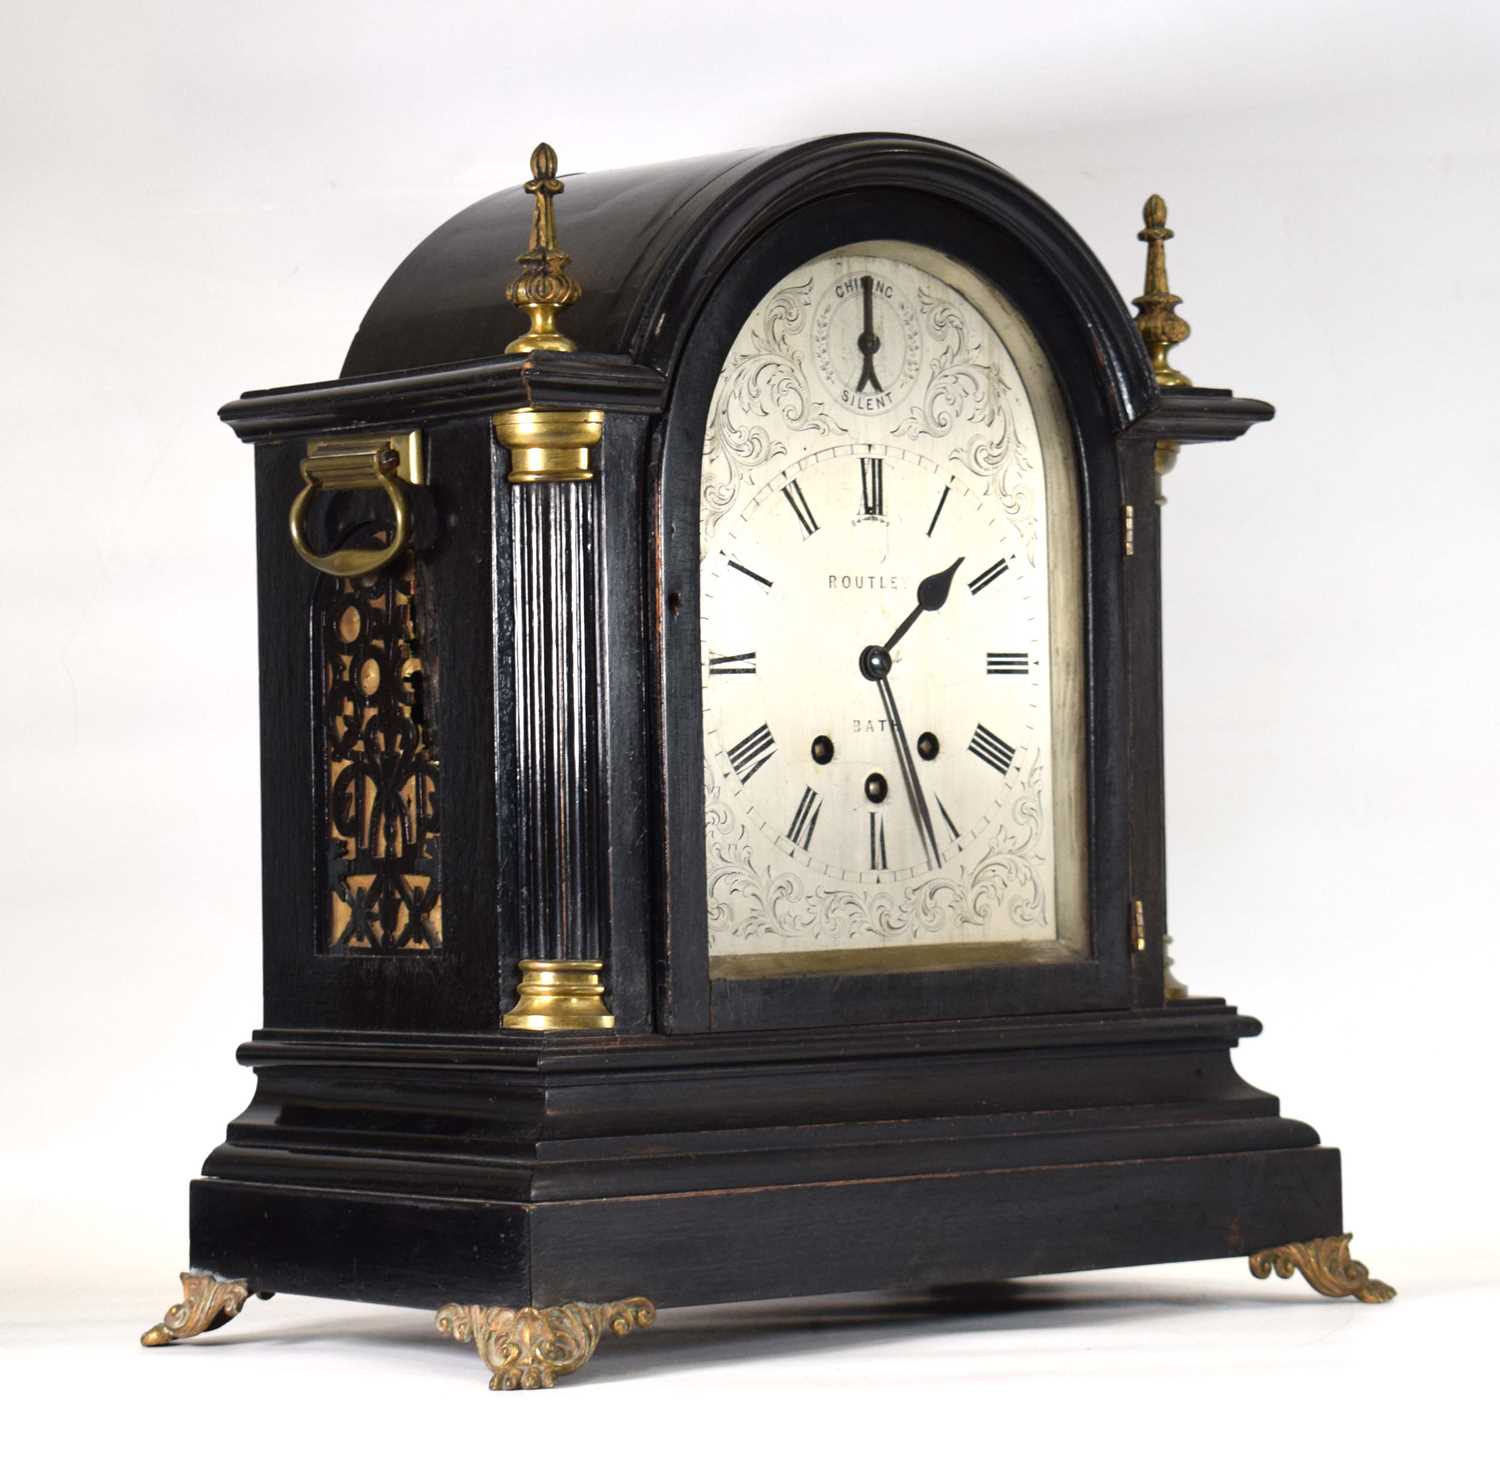 Edwin Routley of Bath, a mid-Victorian bracket clock, the movement chiming on eight concentric bells - Image 4 of 10